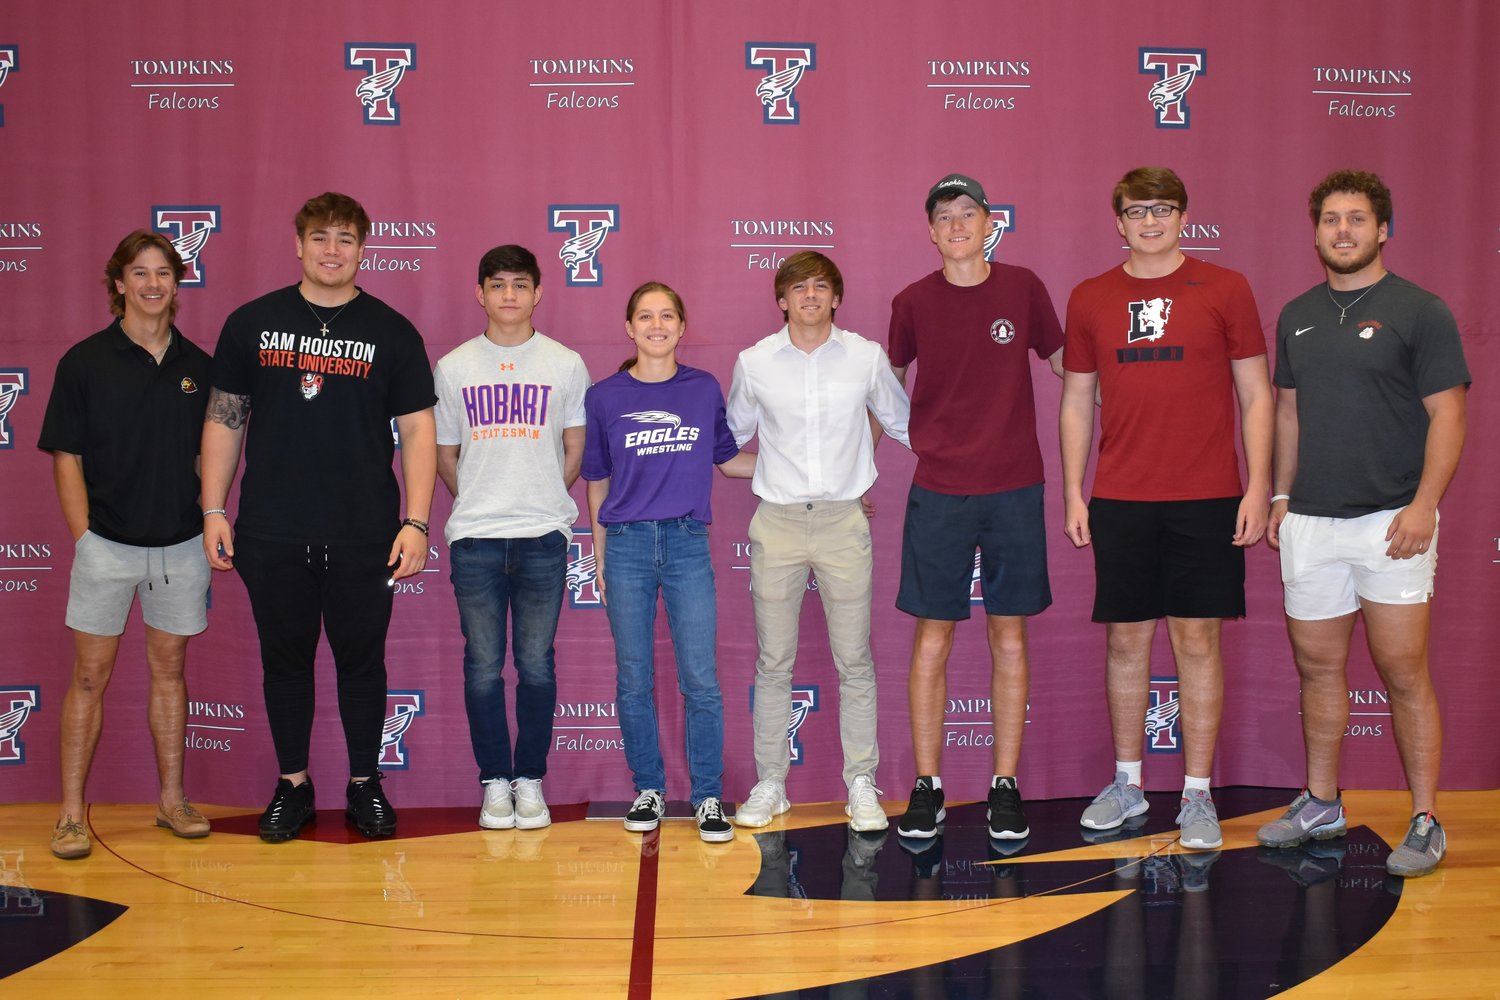 Tompkins student athletes pose for a photo during National Signing Day.